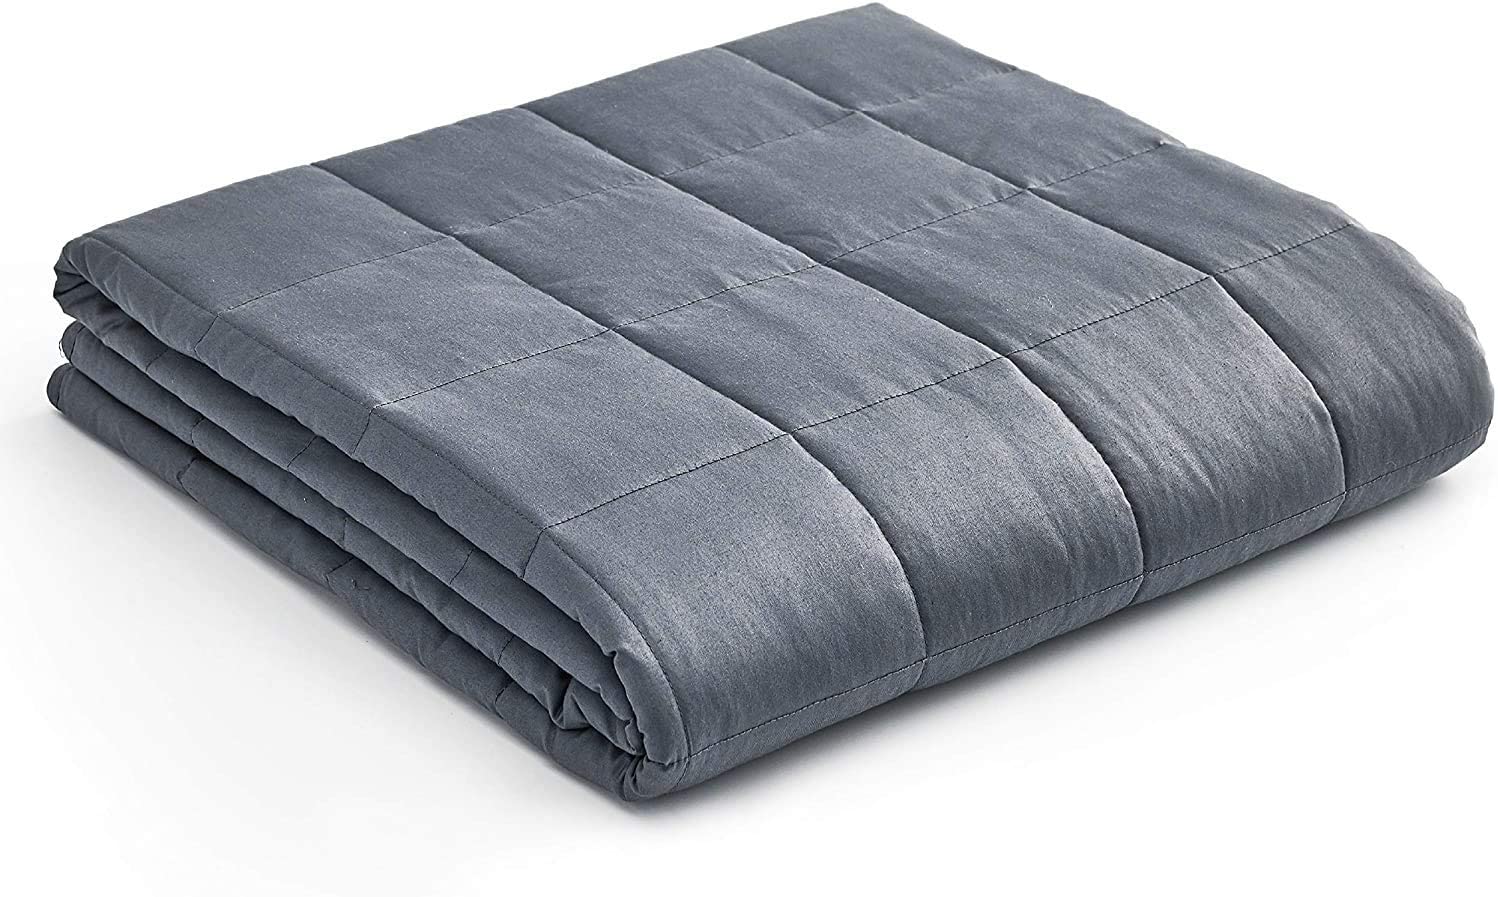 Weighted Blanket 10 lbs. for Kids Weigh Around 90lbs, 41''x60'', Gray